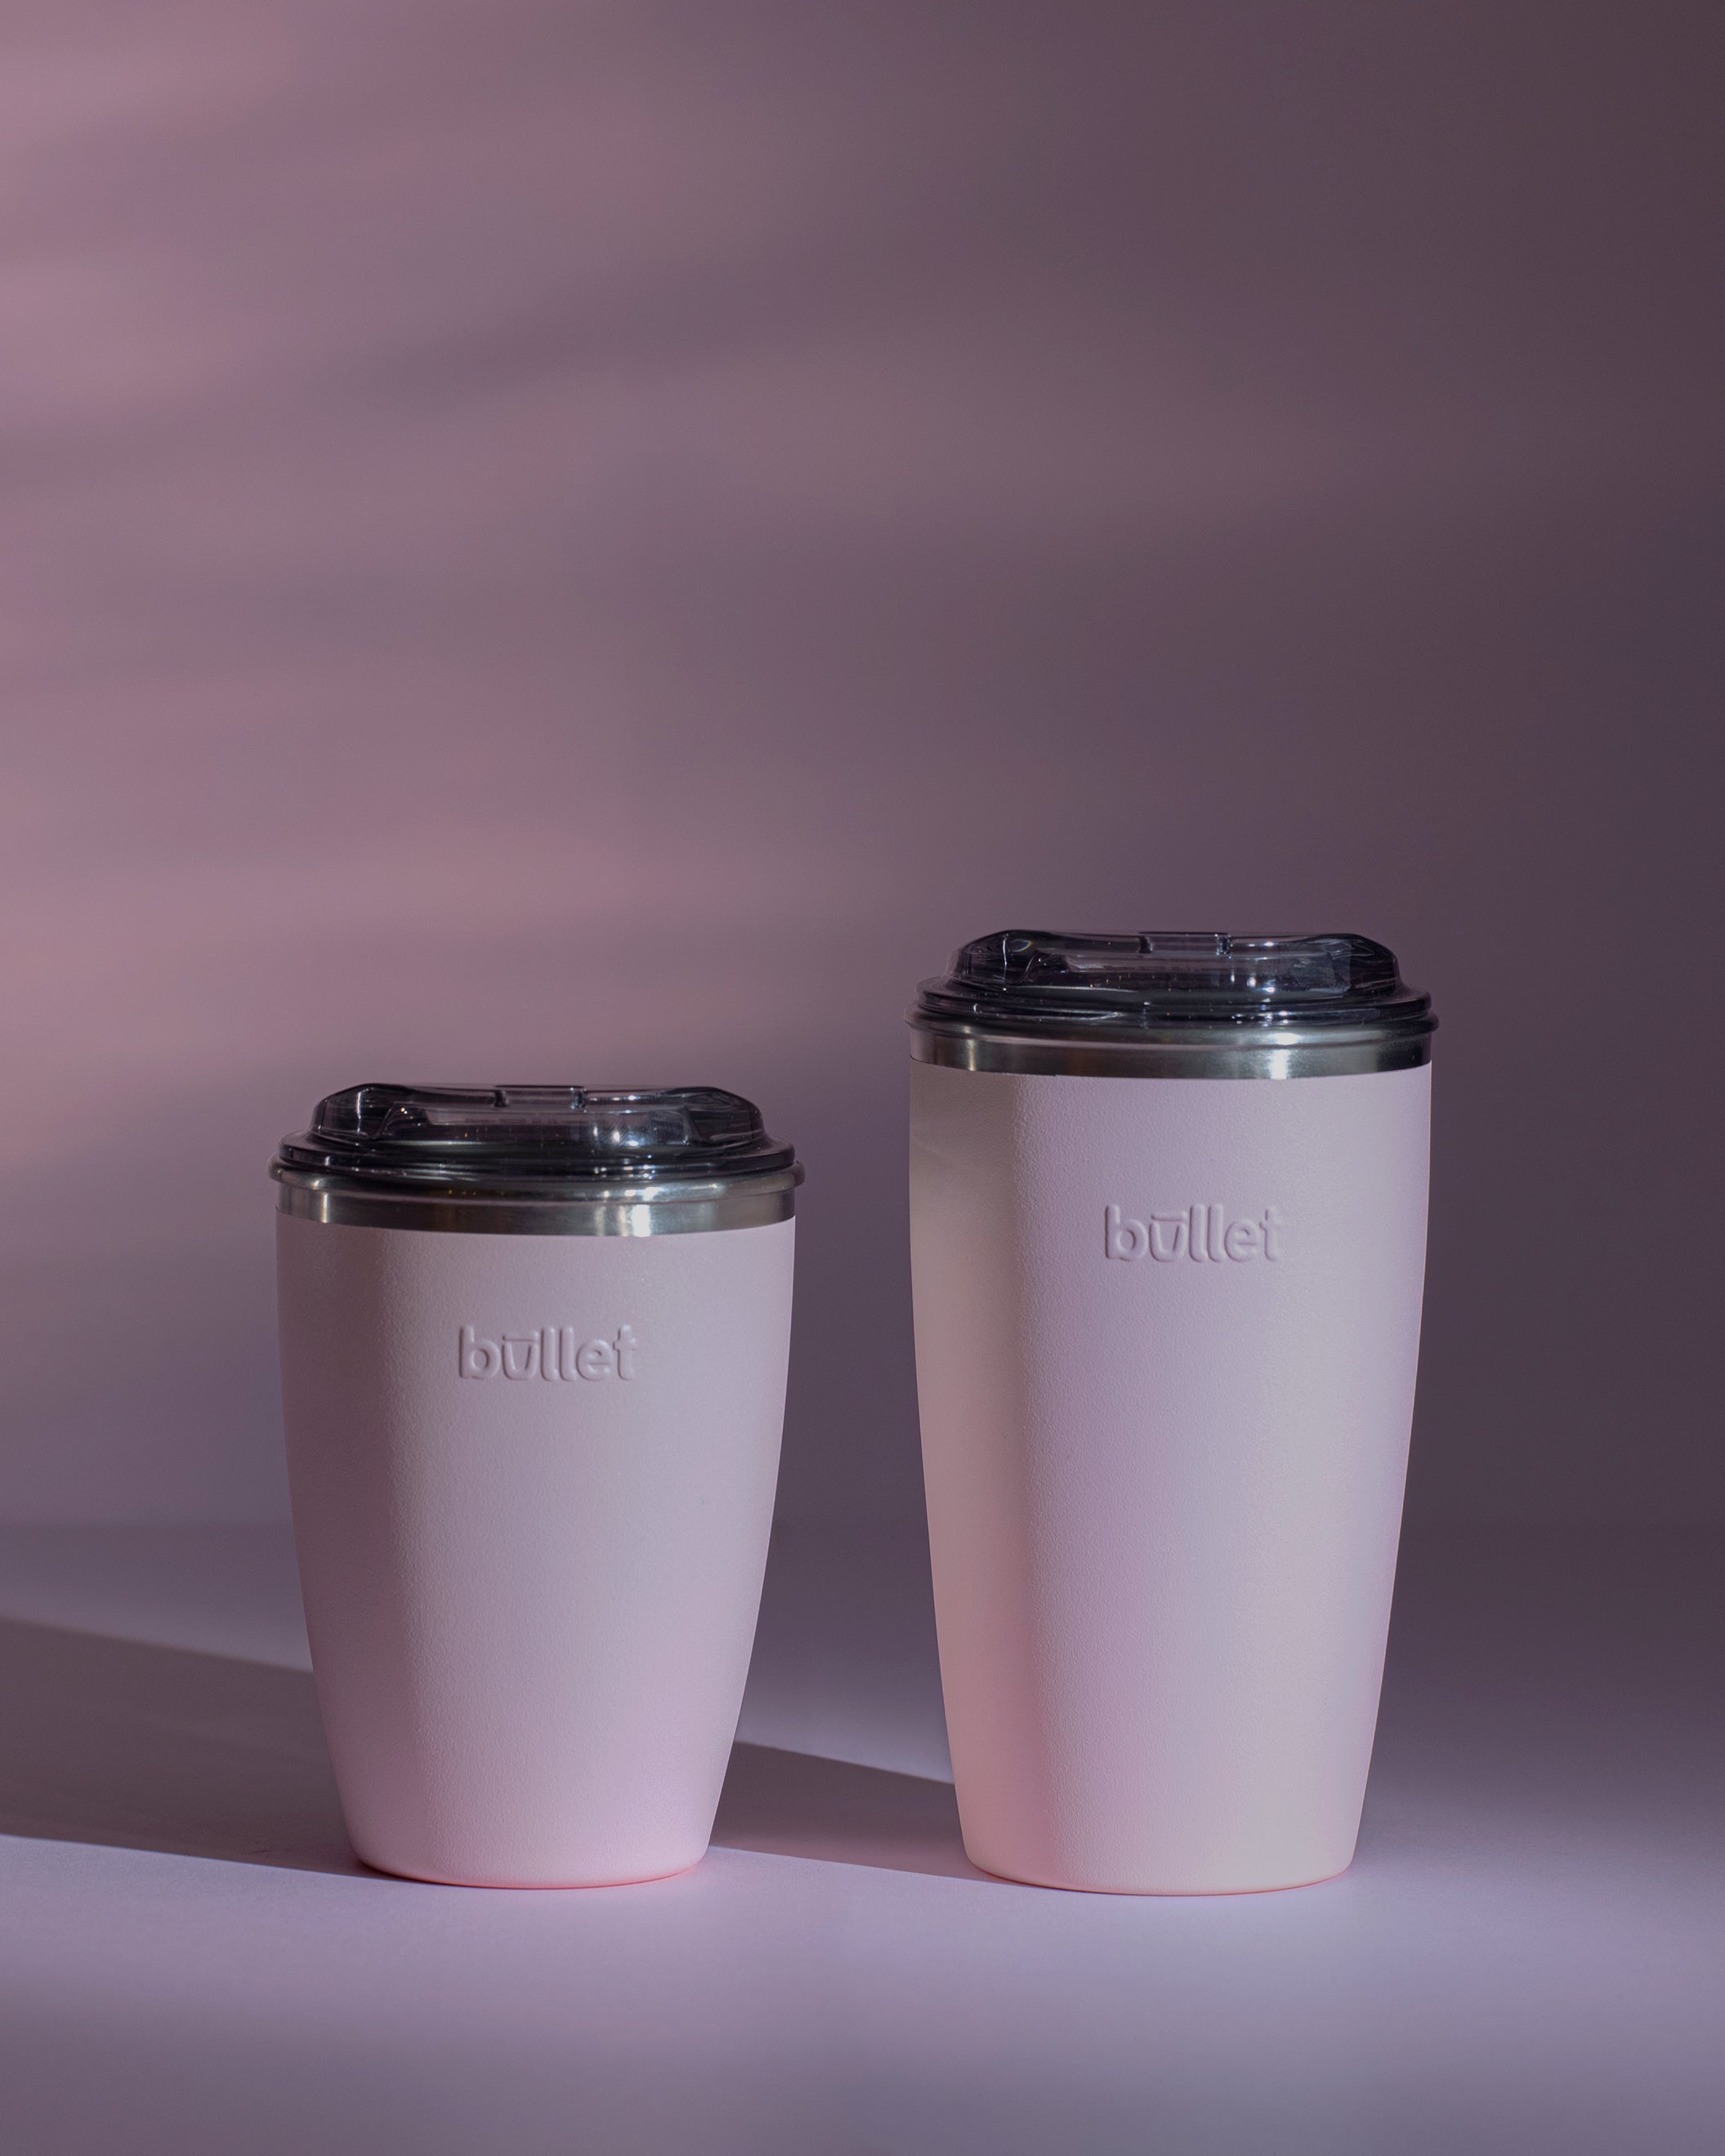 Side by side comparison of an 8oz and 12oz pink Bullet cup